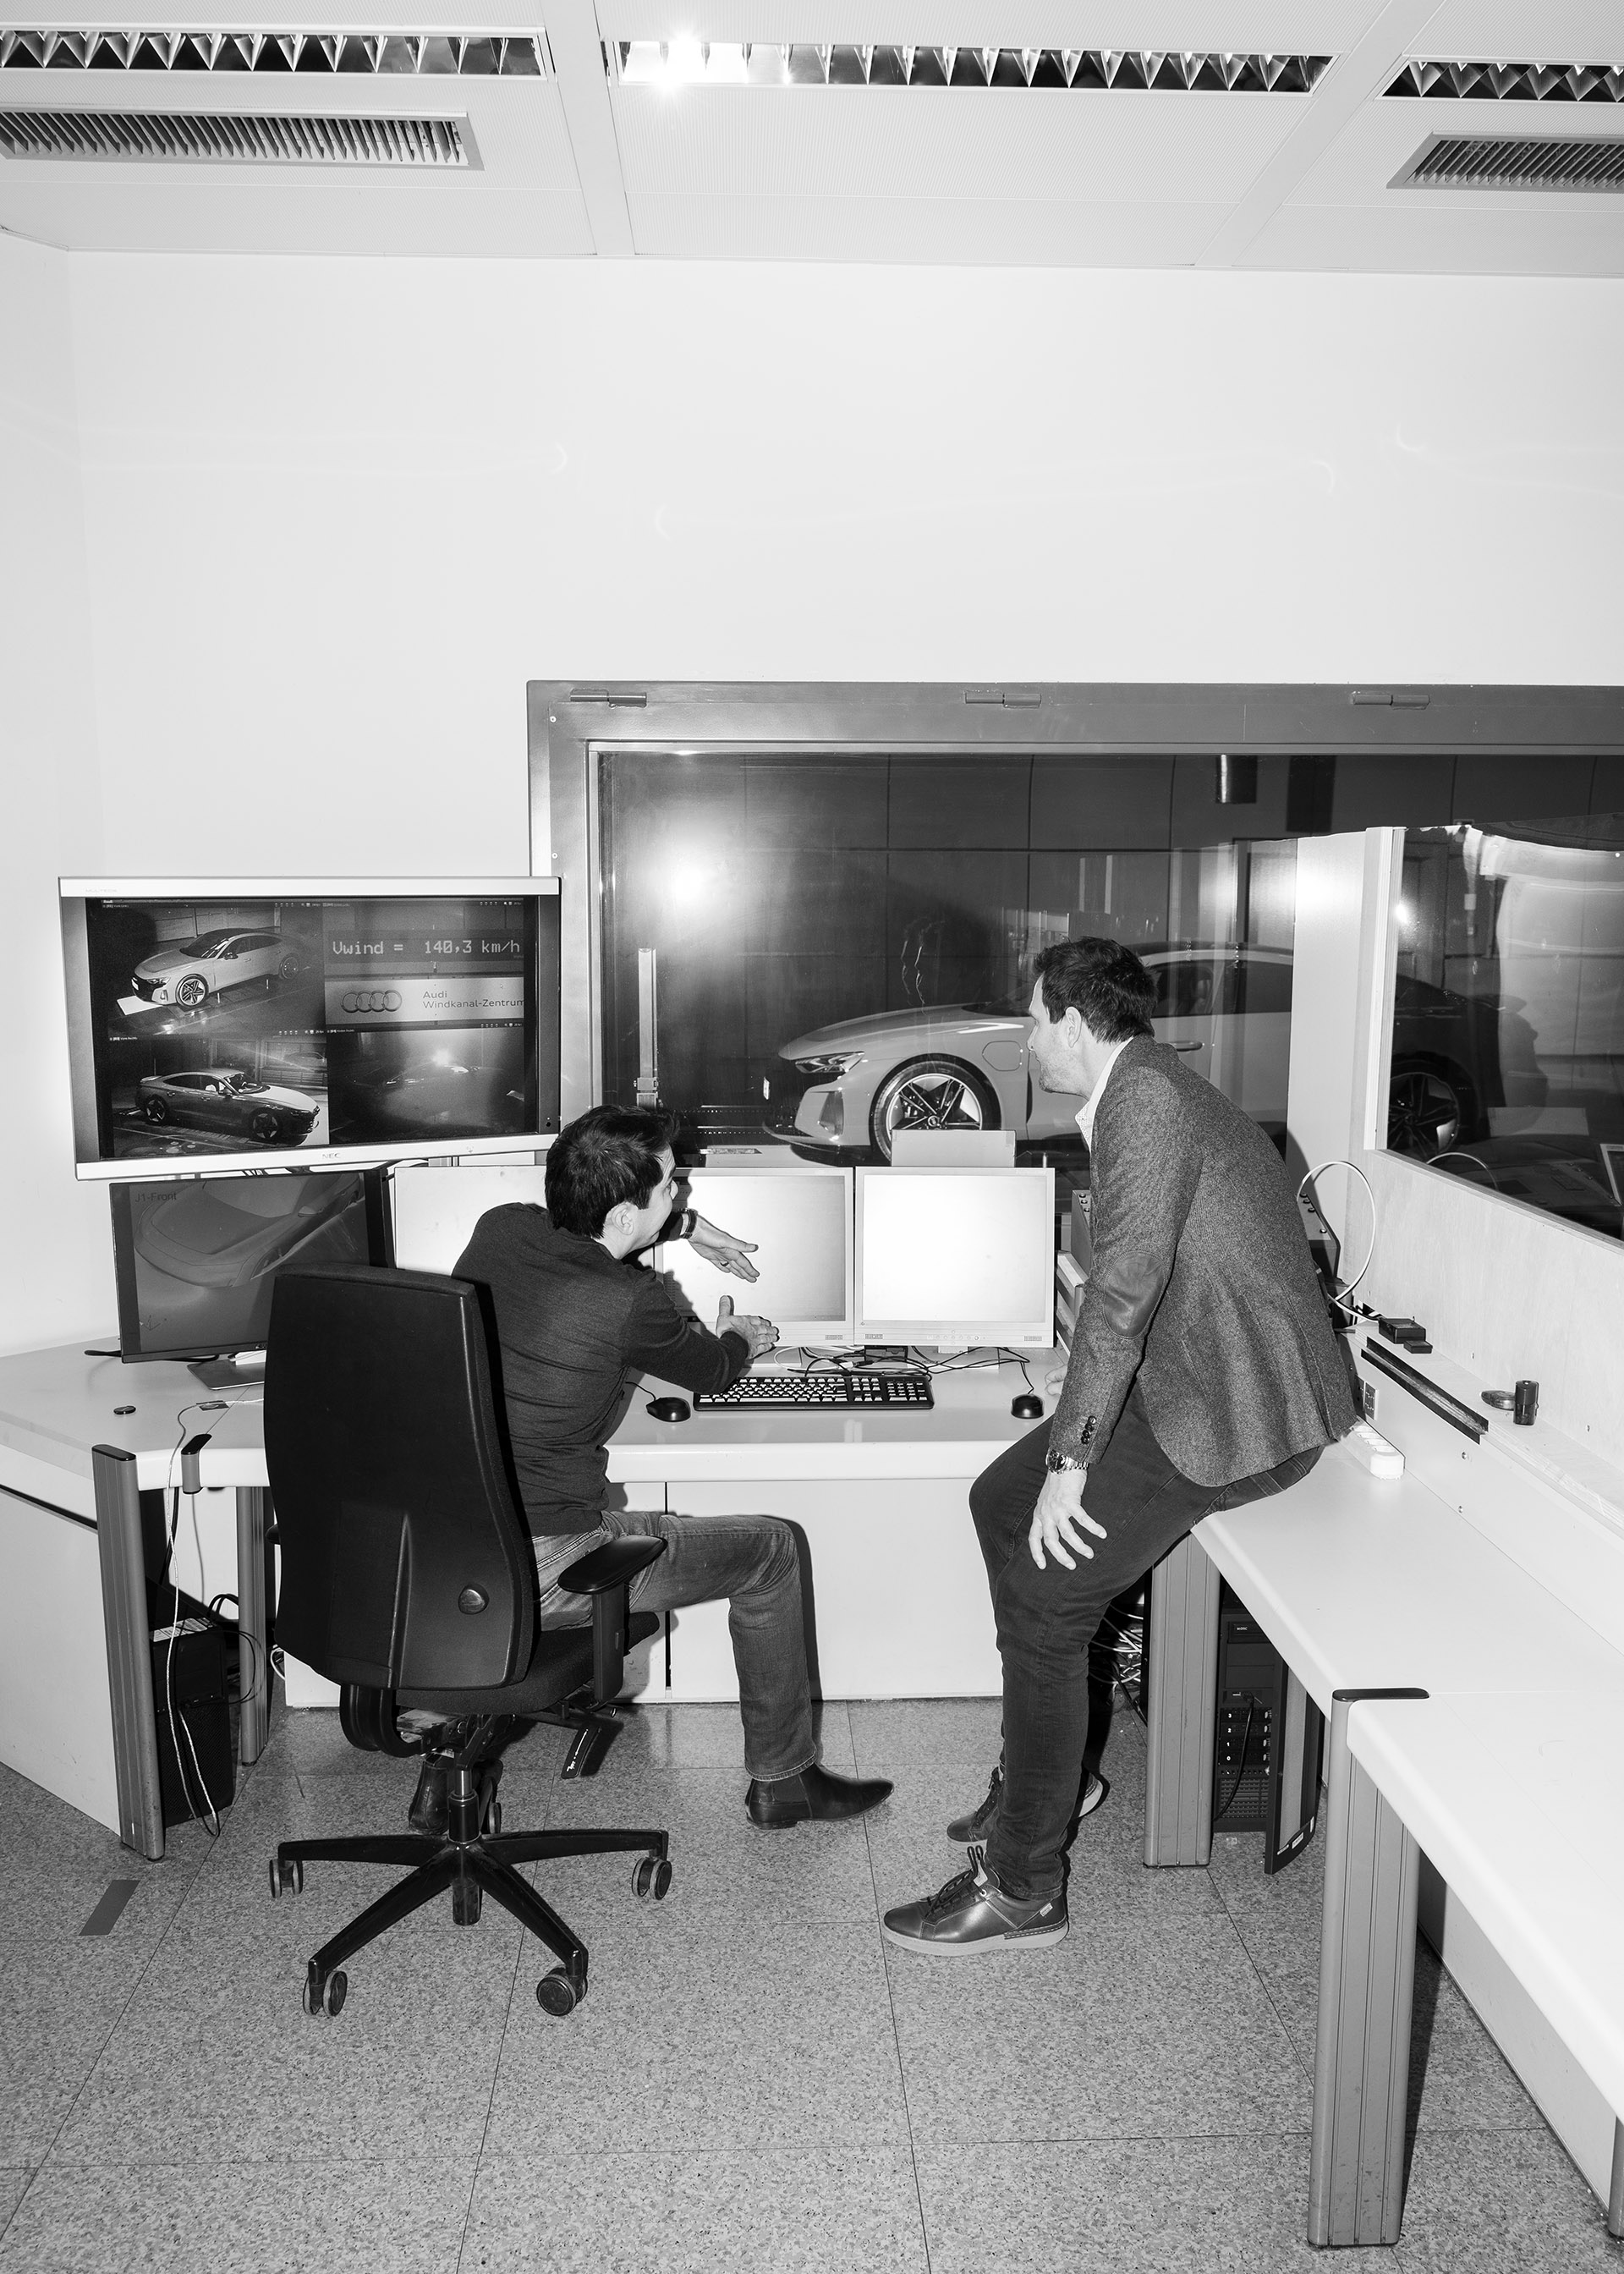 Dr. Kentaro Zens and Thomas Redenbach in discussion in front of a number of computer screens, with the Audi RS e-tron GT{ft_rs-e-tron-gt} behind a window in the background.